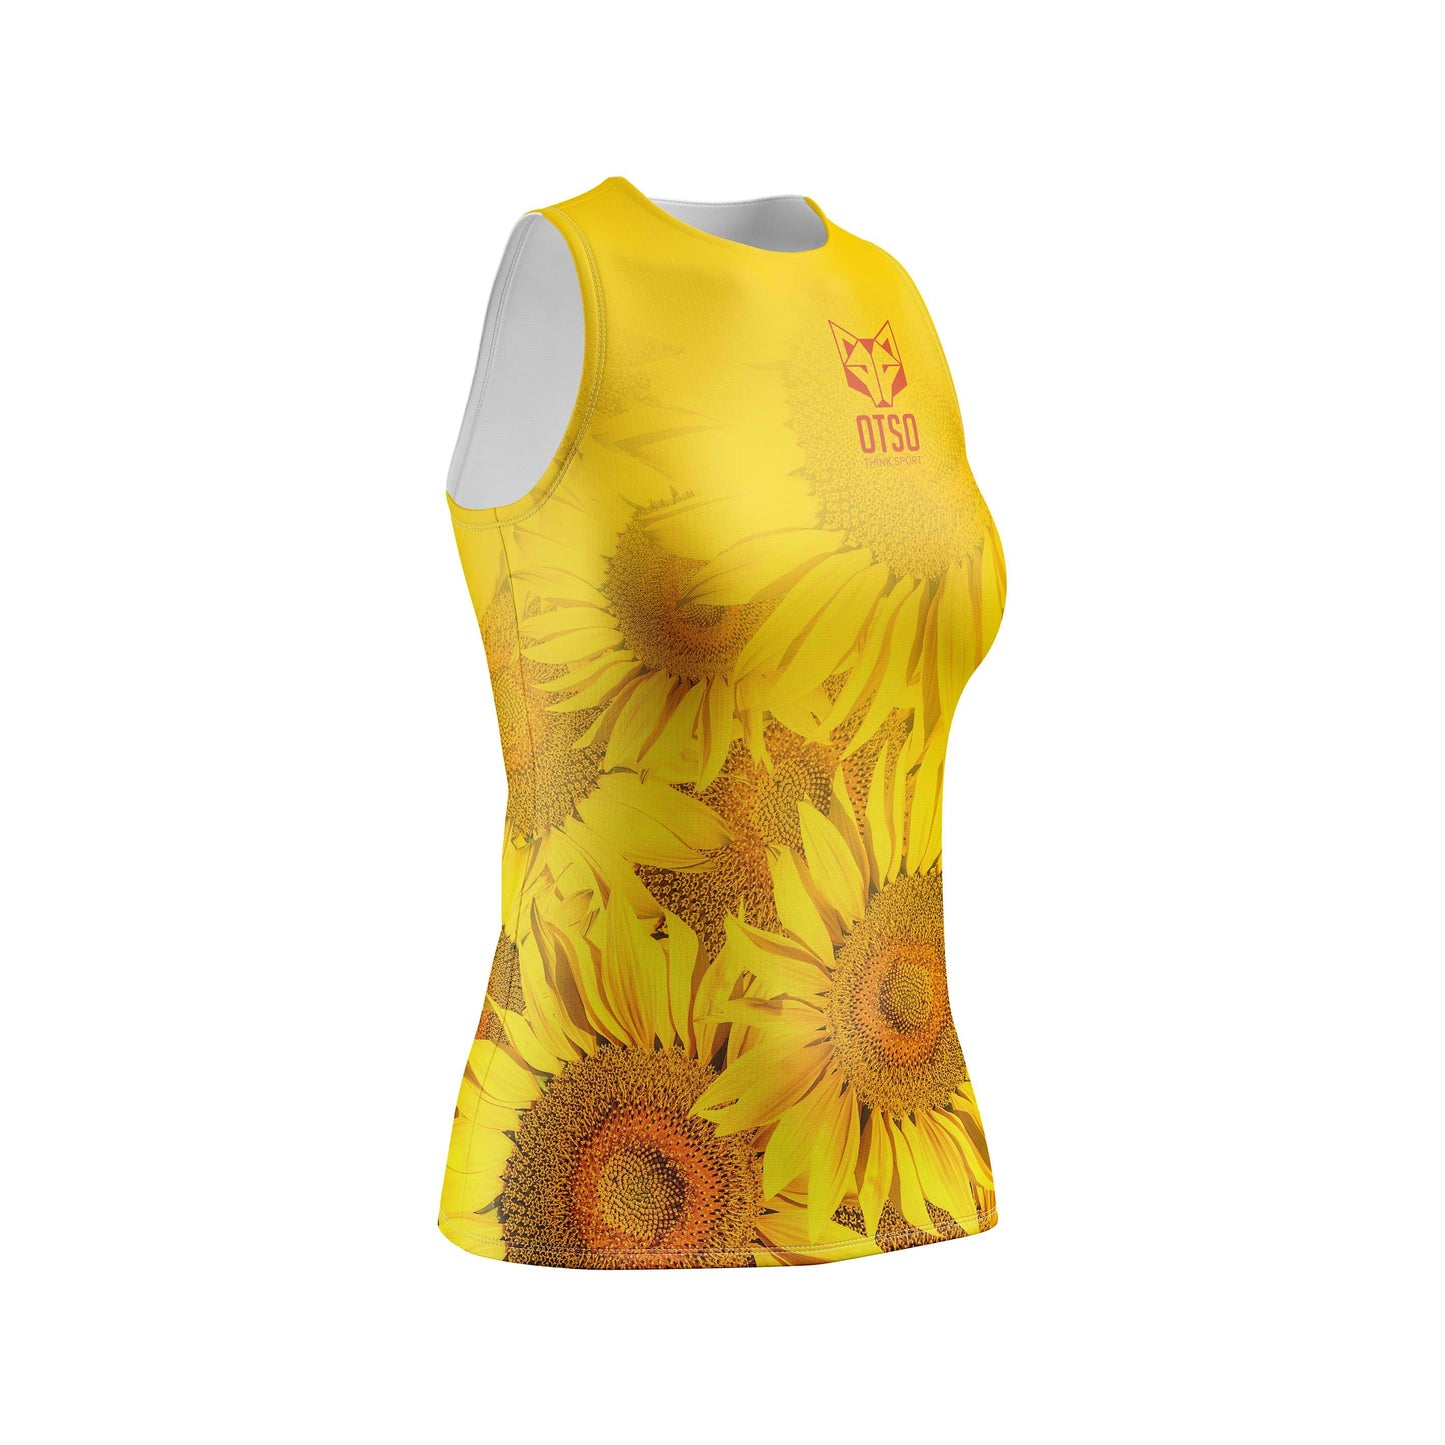 Camiseta sin mangas mujer - Sunflower (Outlet)